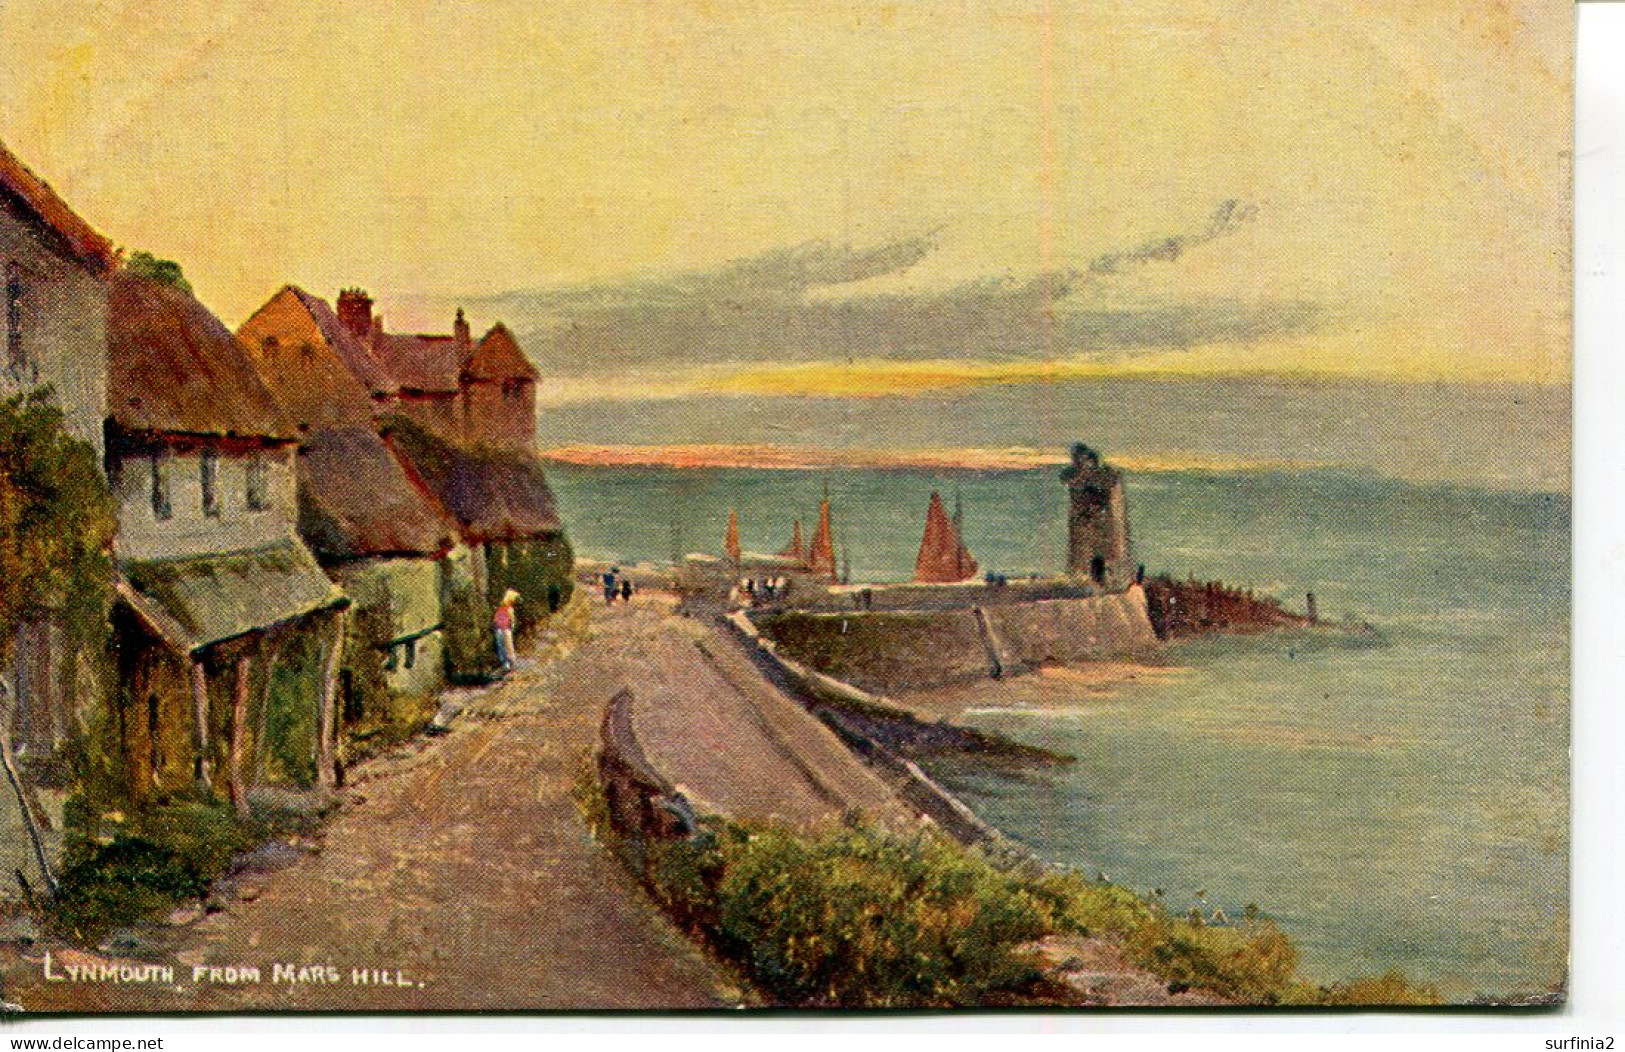 MISCELLANEOUS ART - HILDESHEIMER  5369 - LYNMOUTH FROM MARS HILL Art503 - Lynmouth & Lynton